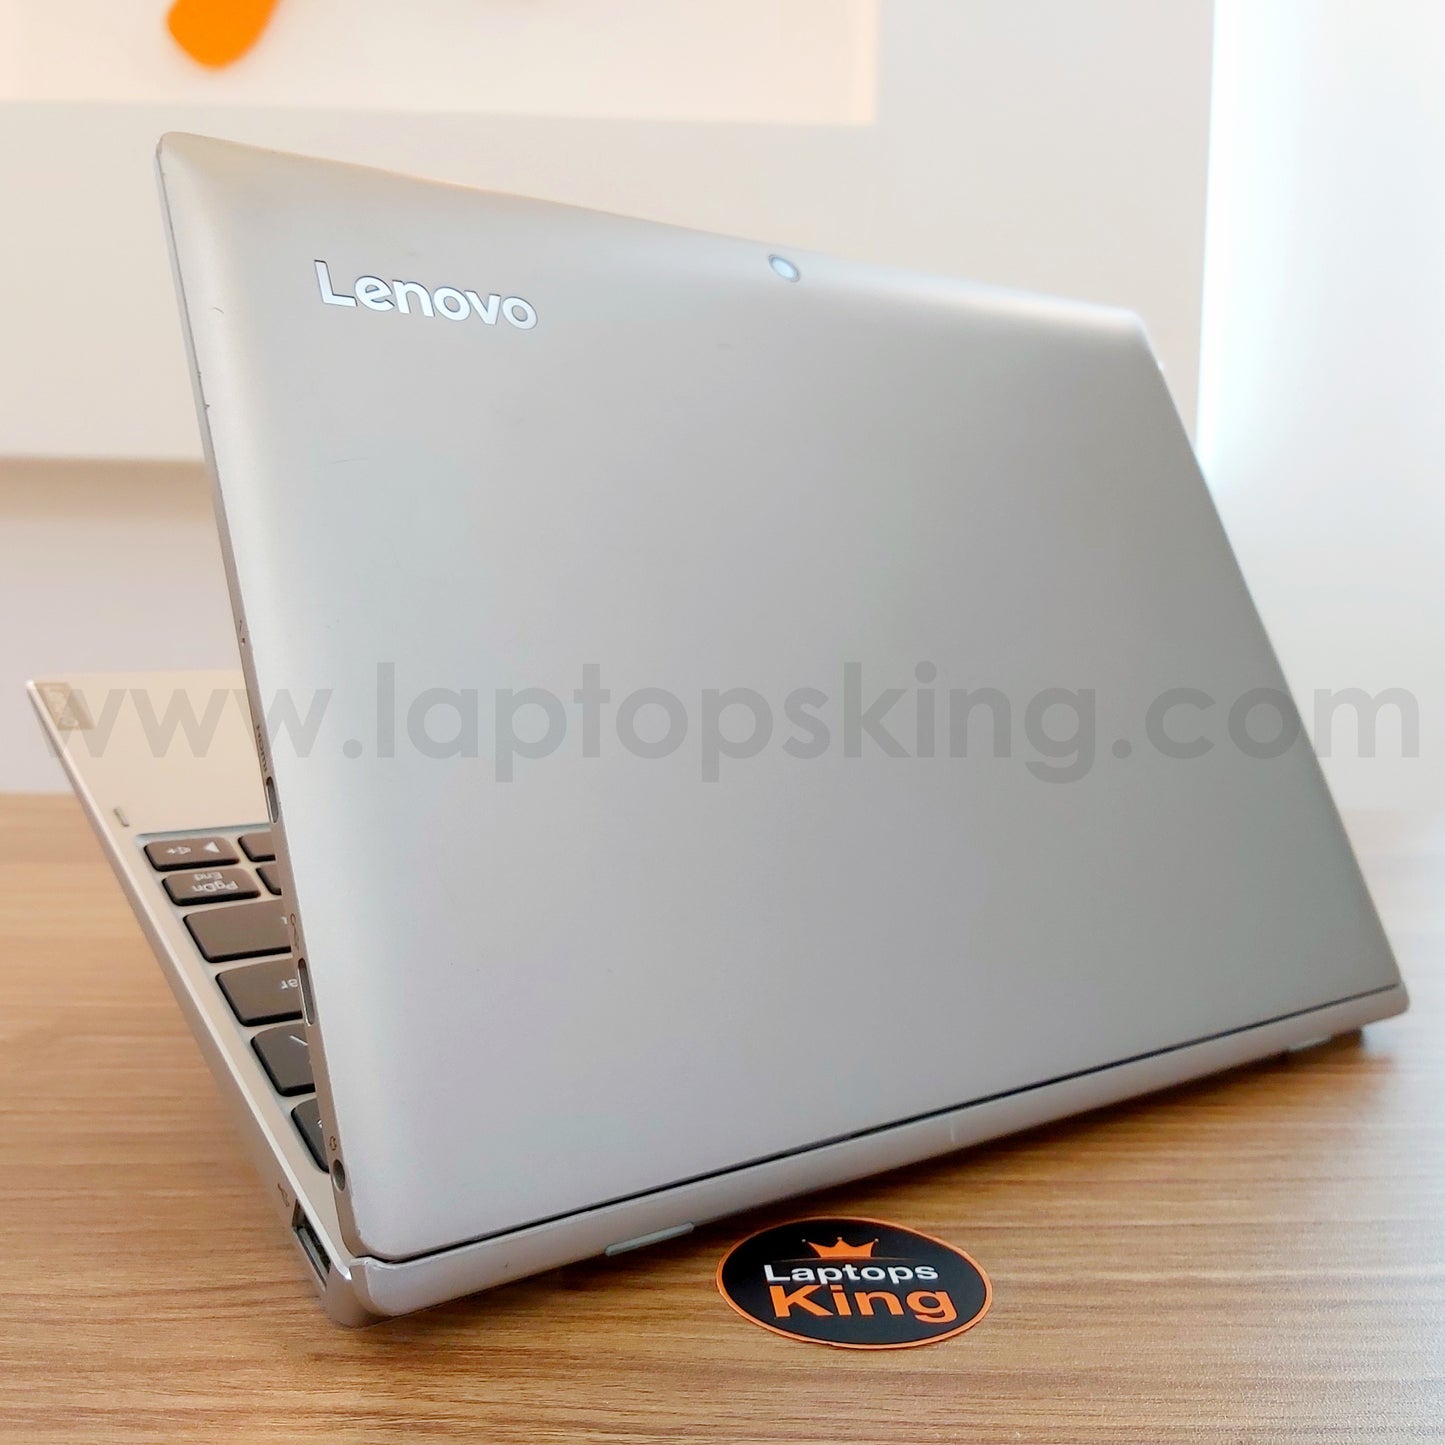 Lenovo IdeaPad 80xf 2in1 Laptop (Used Very Clean)